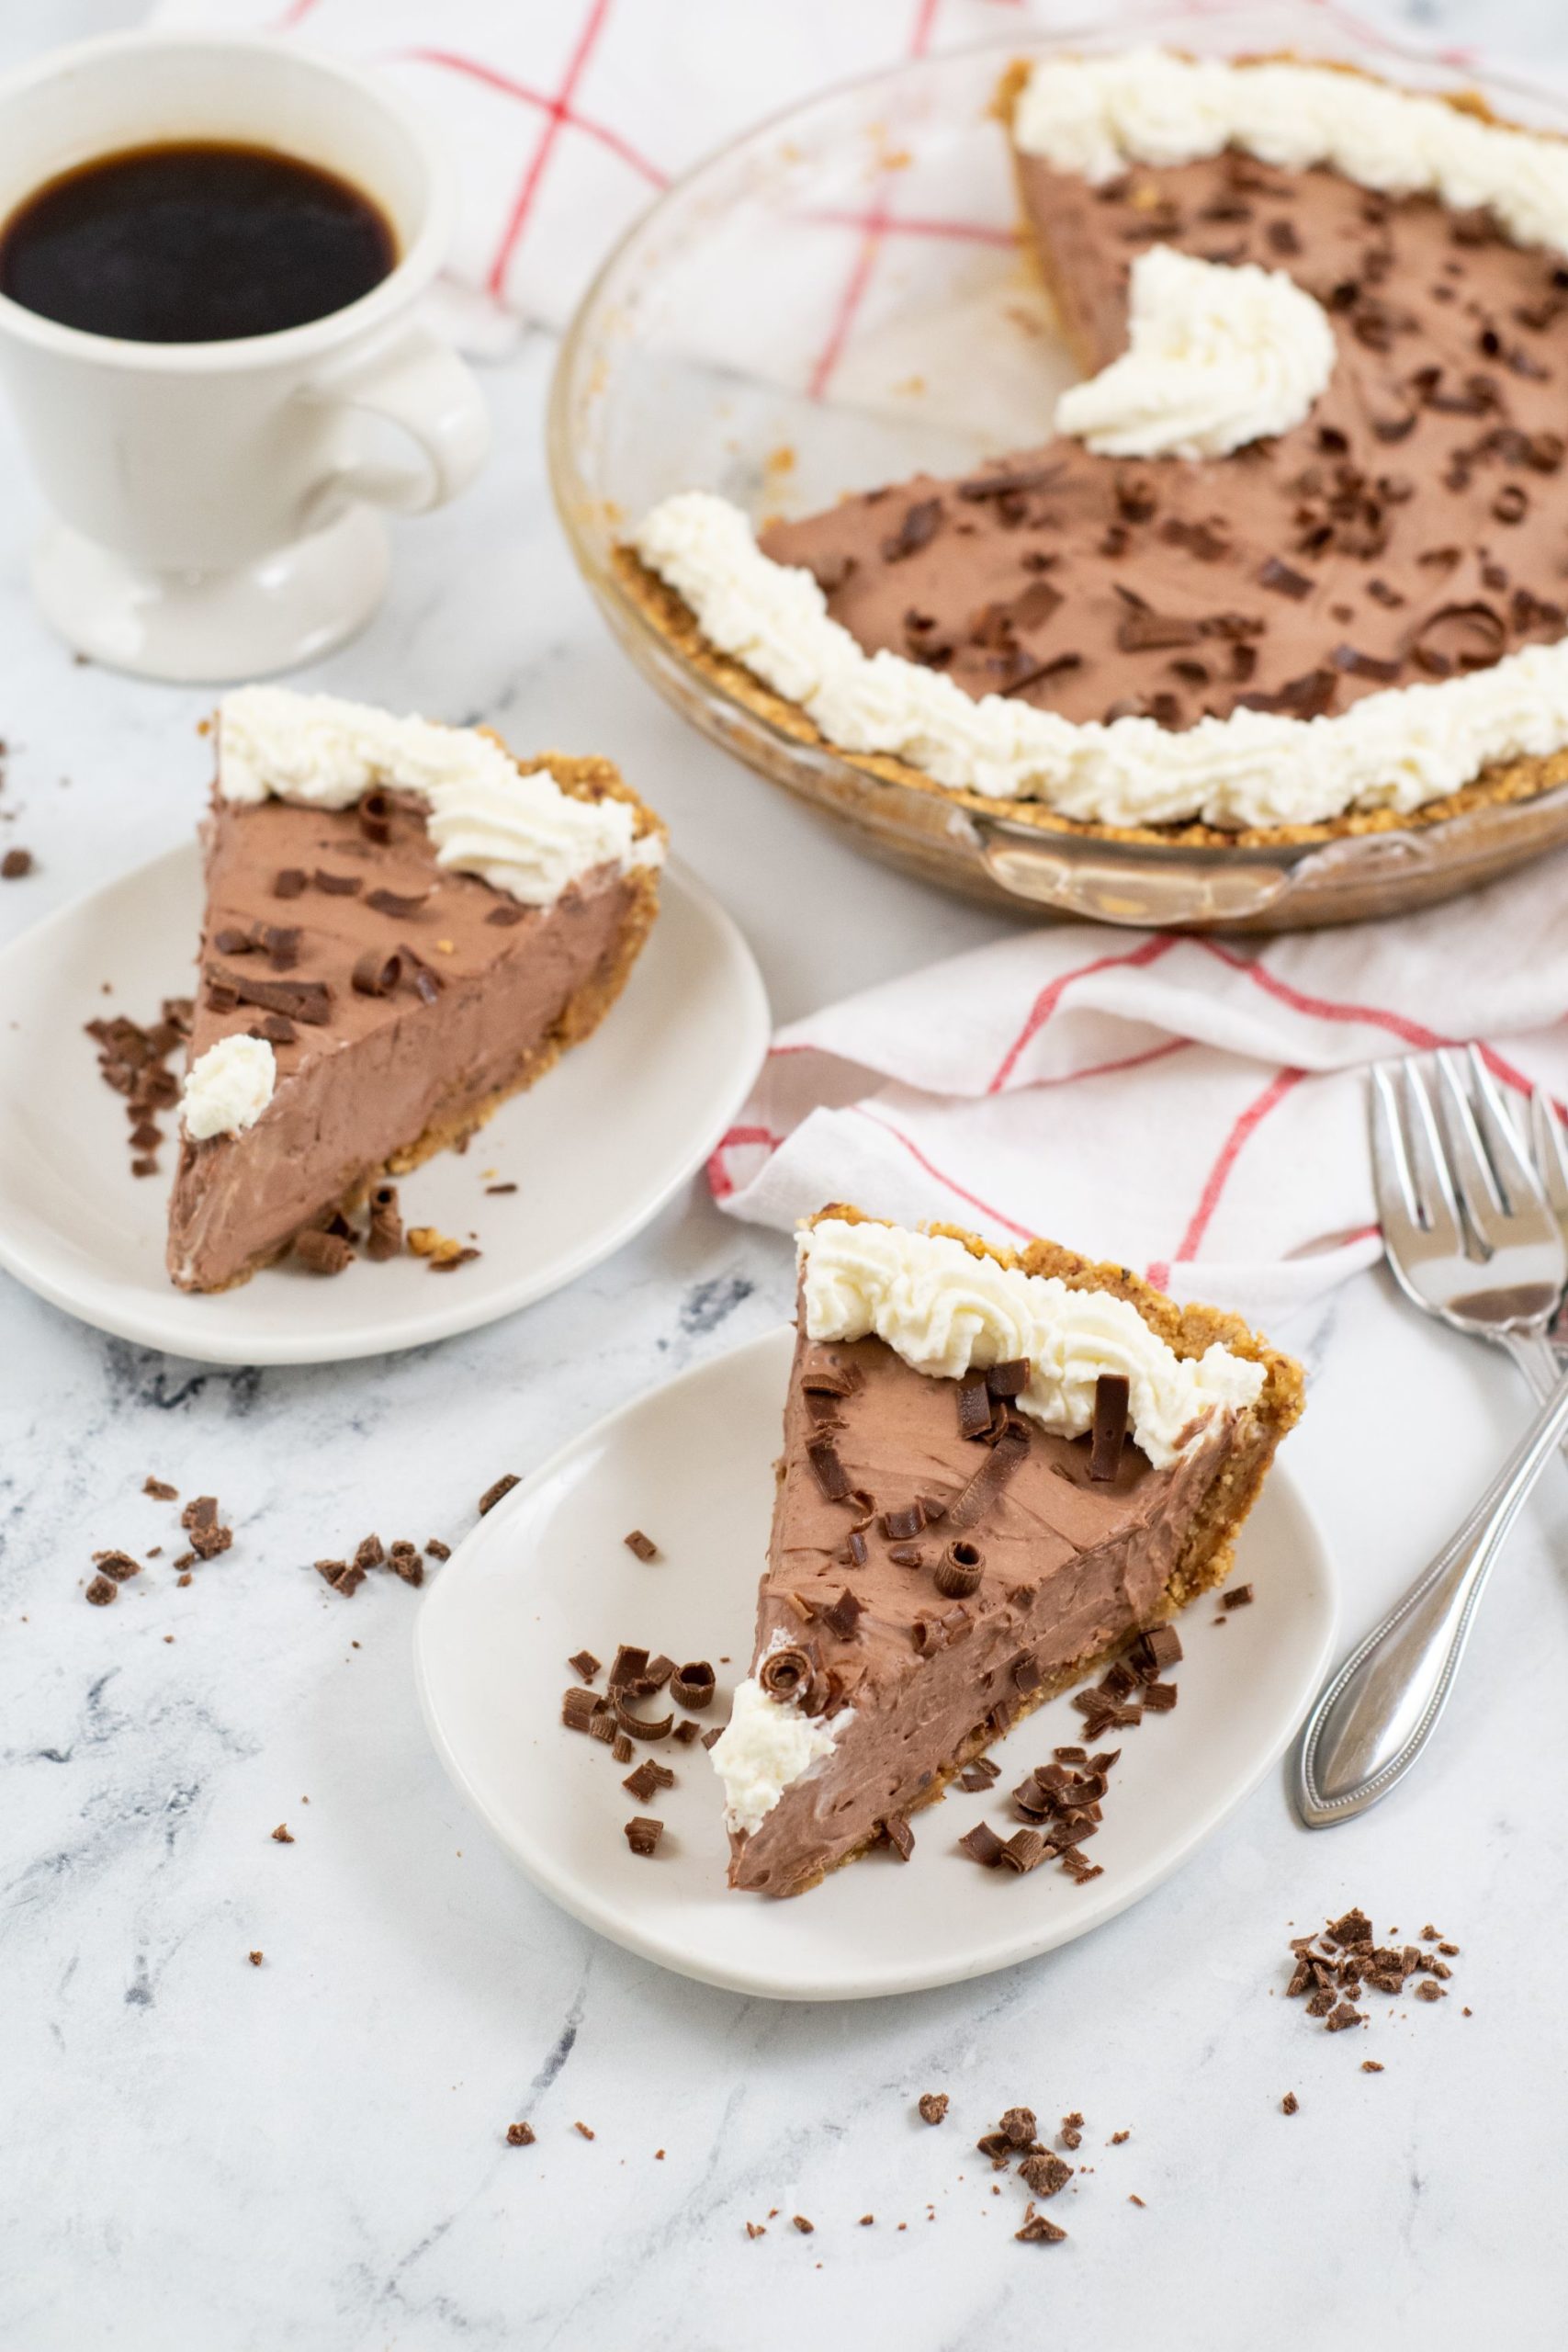 Chocolate Jello Pudding Pie with two slices on white plates.